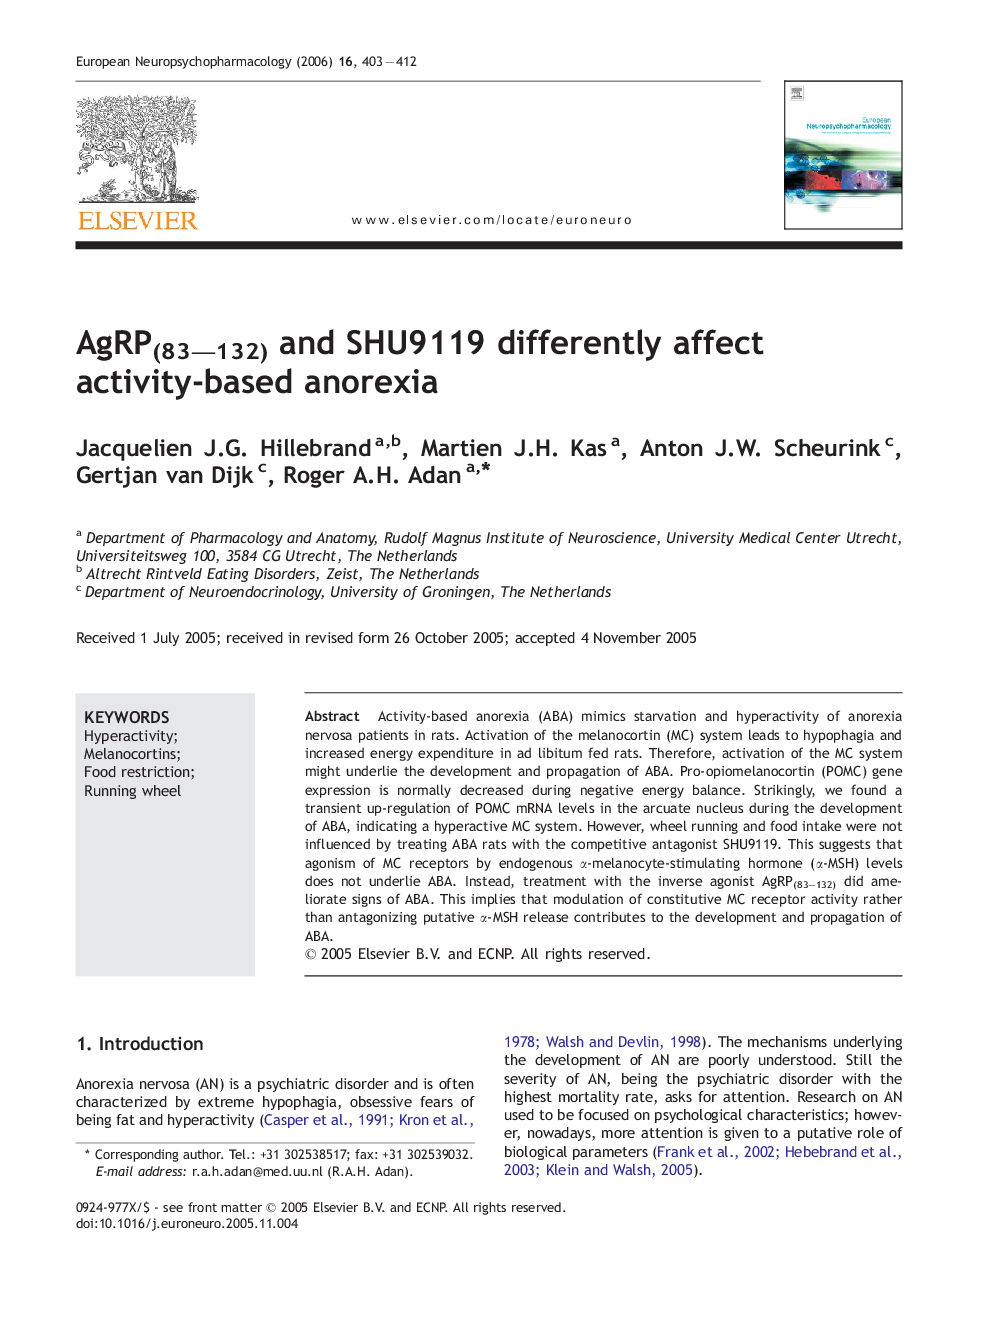 AgRP(83–132) and SHU9119 differently affect activity-based anorexia